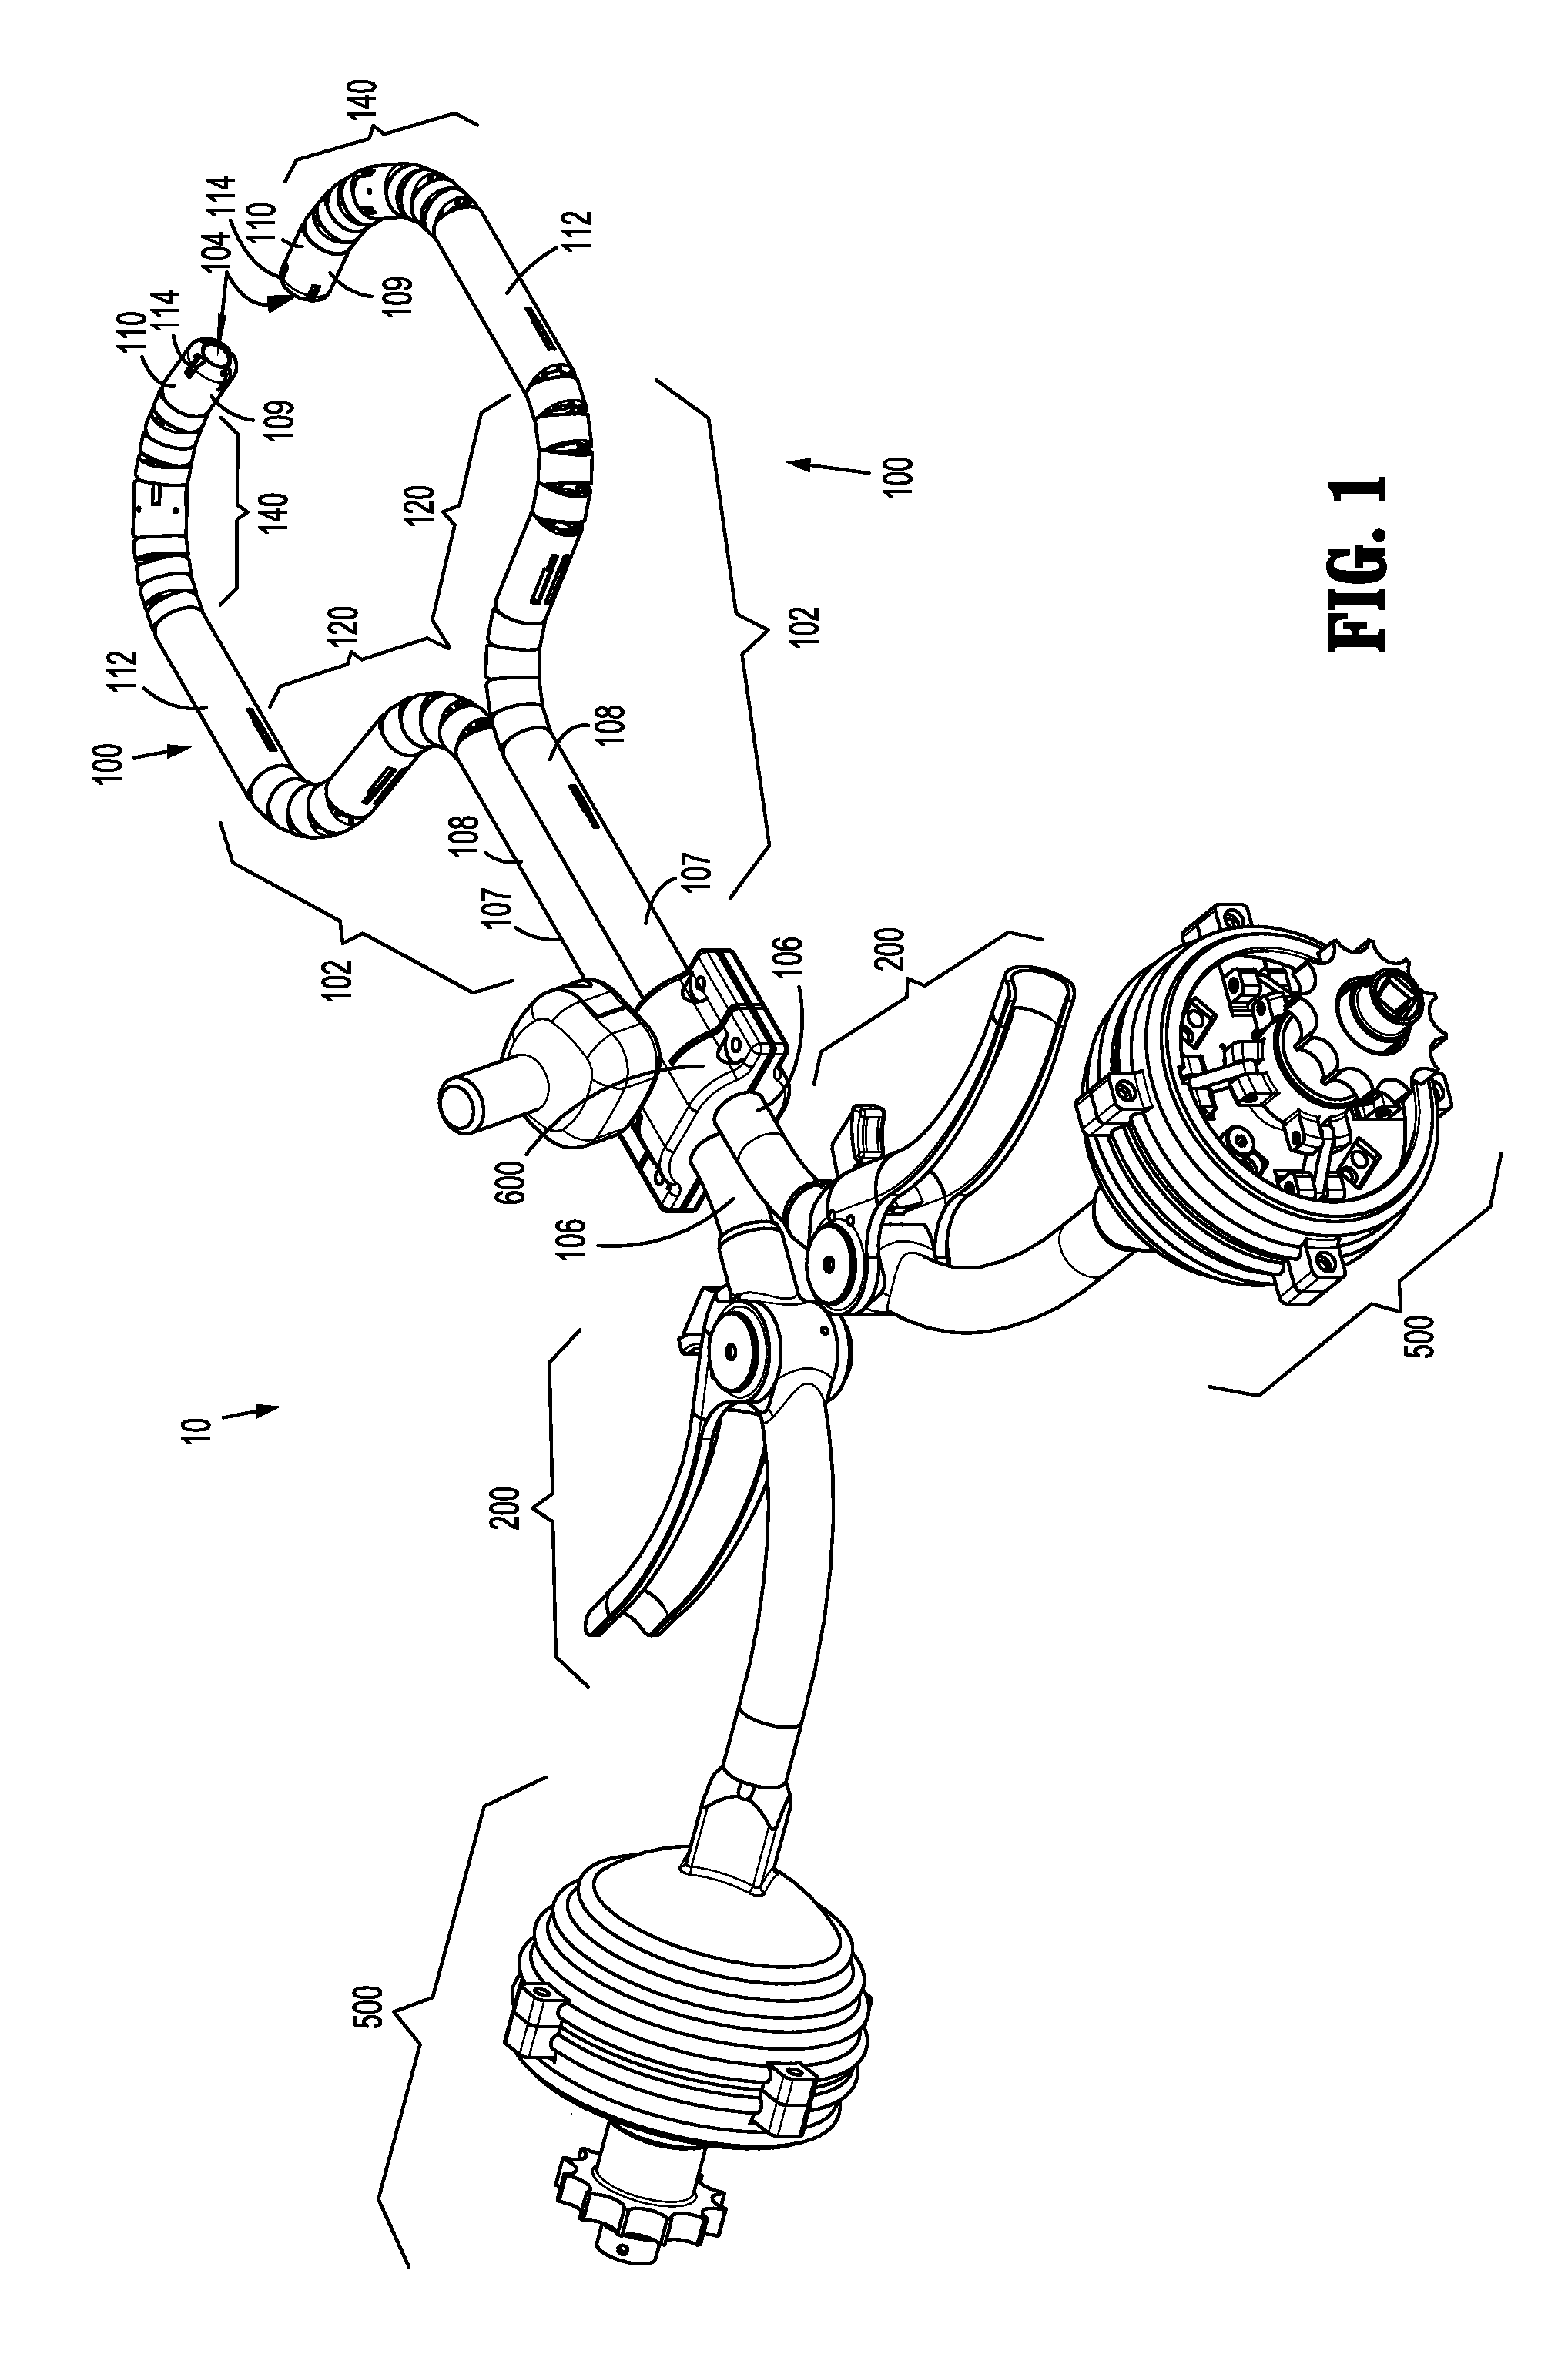 Articulating Surgical Access System For Laparoscopic Surgery